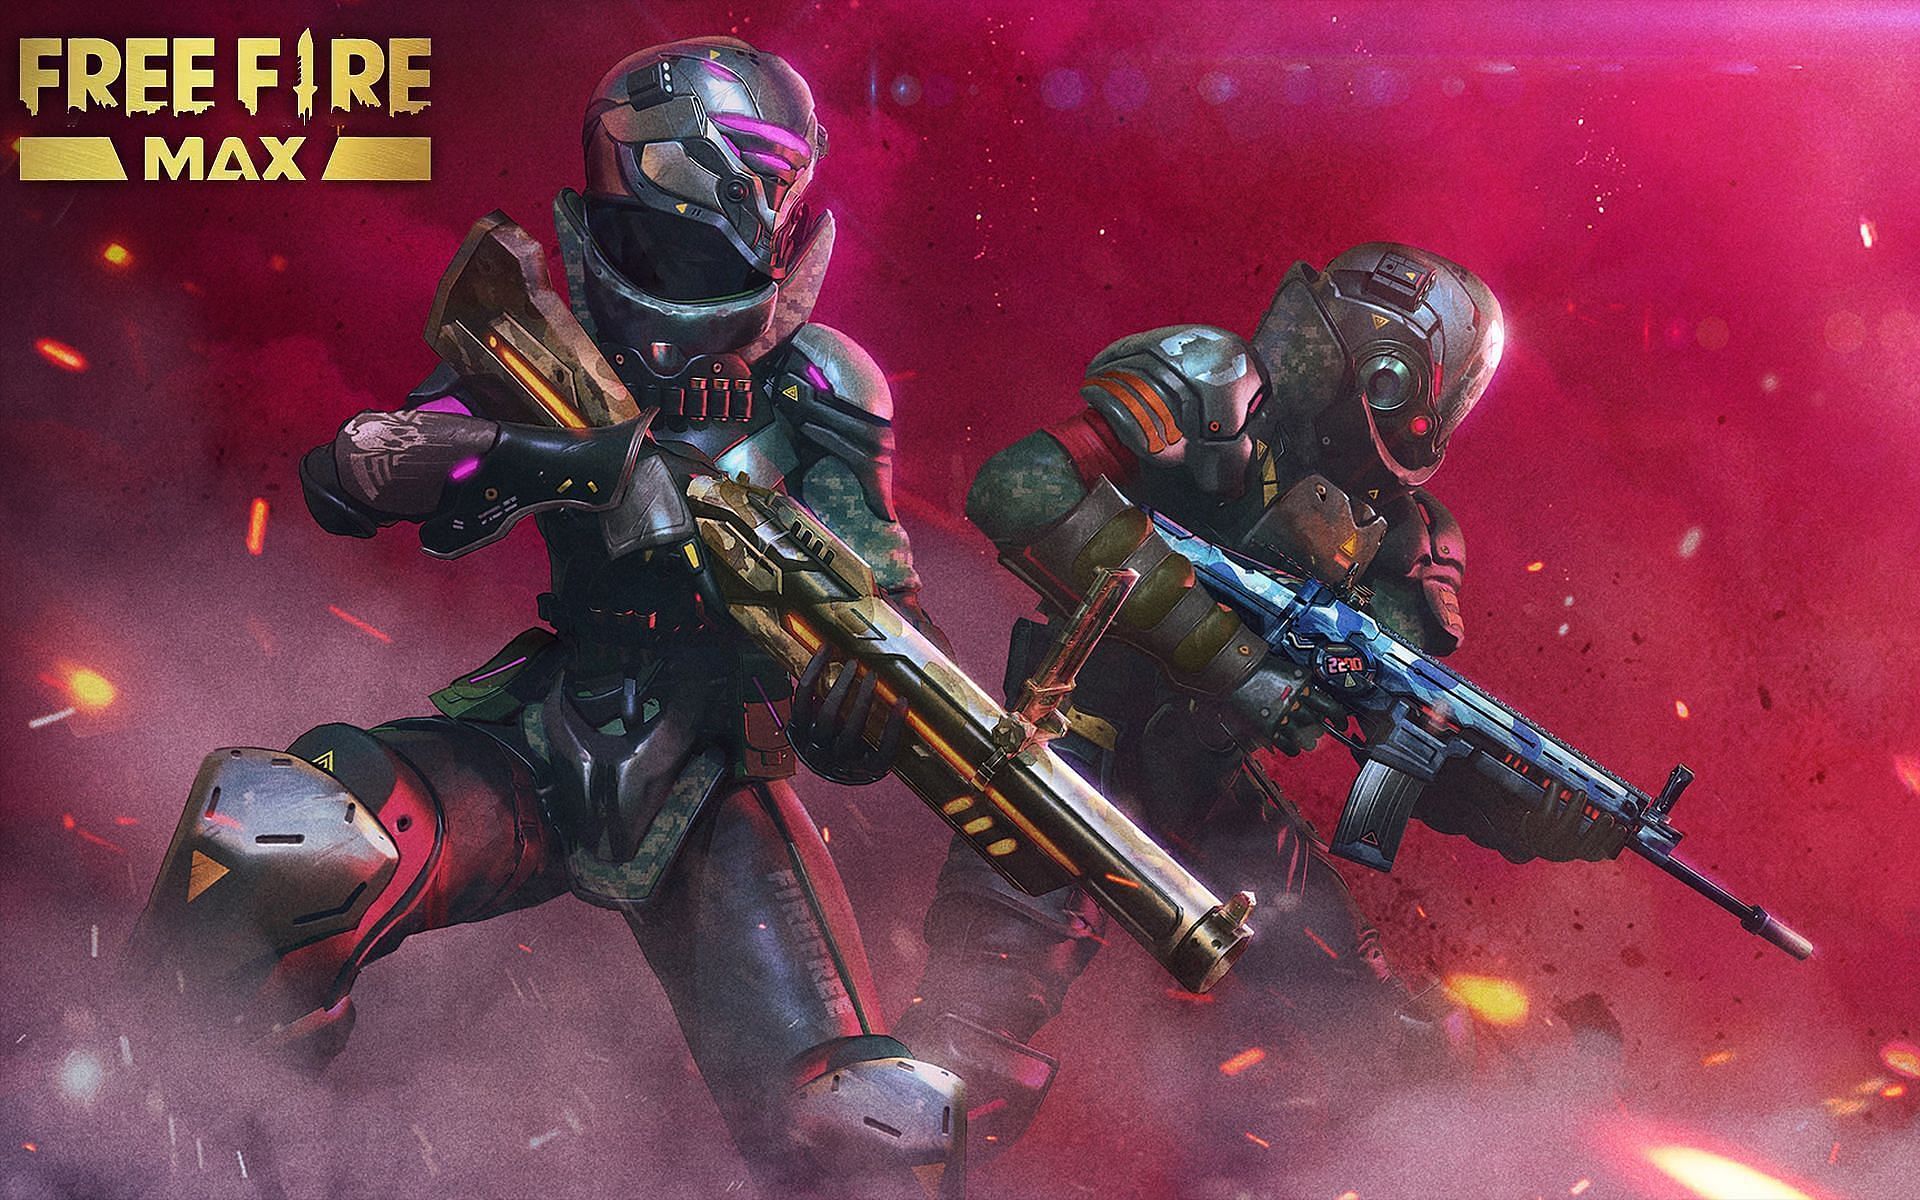 Diamonds can help with purchasing the Free Fire MAX Elite Pass (Image via Garena)